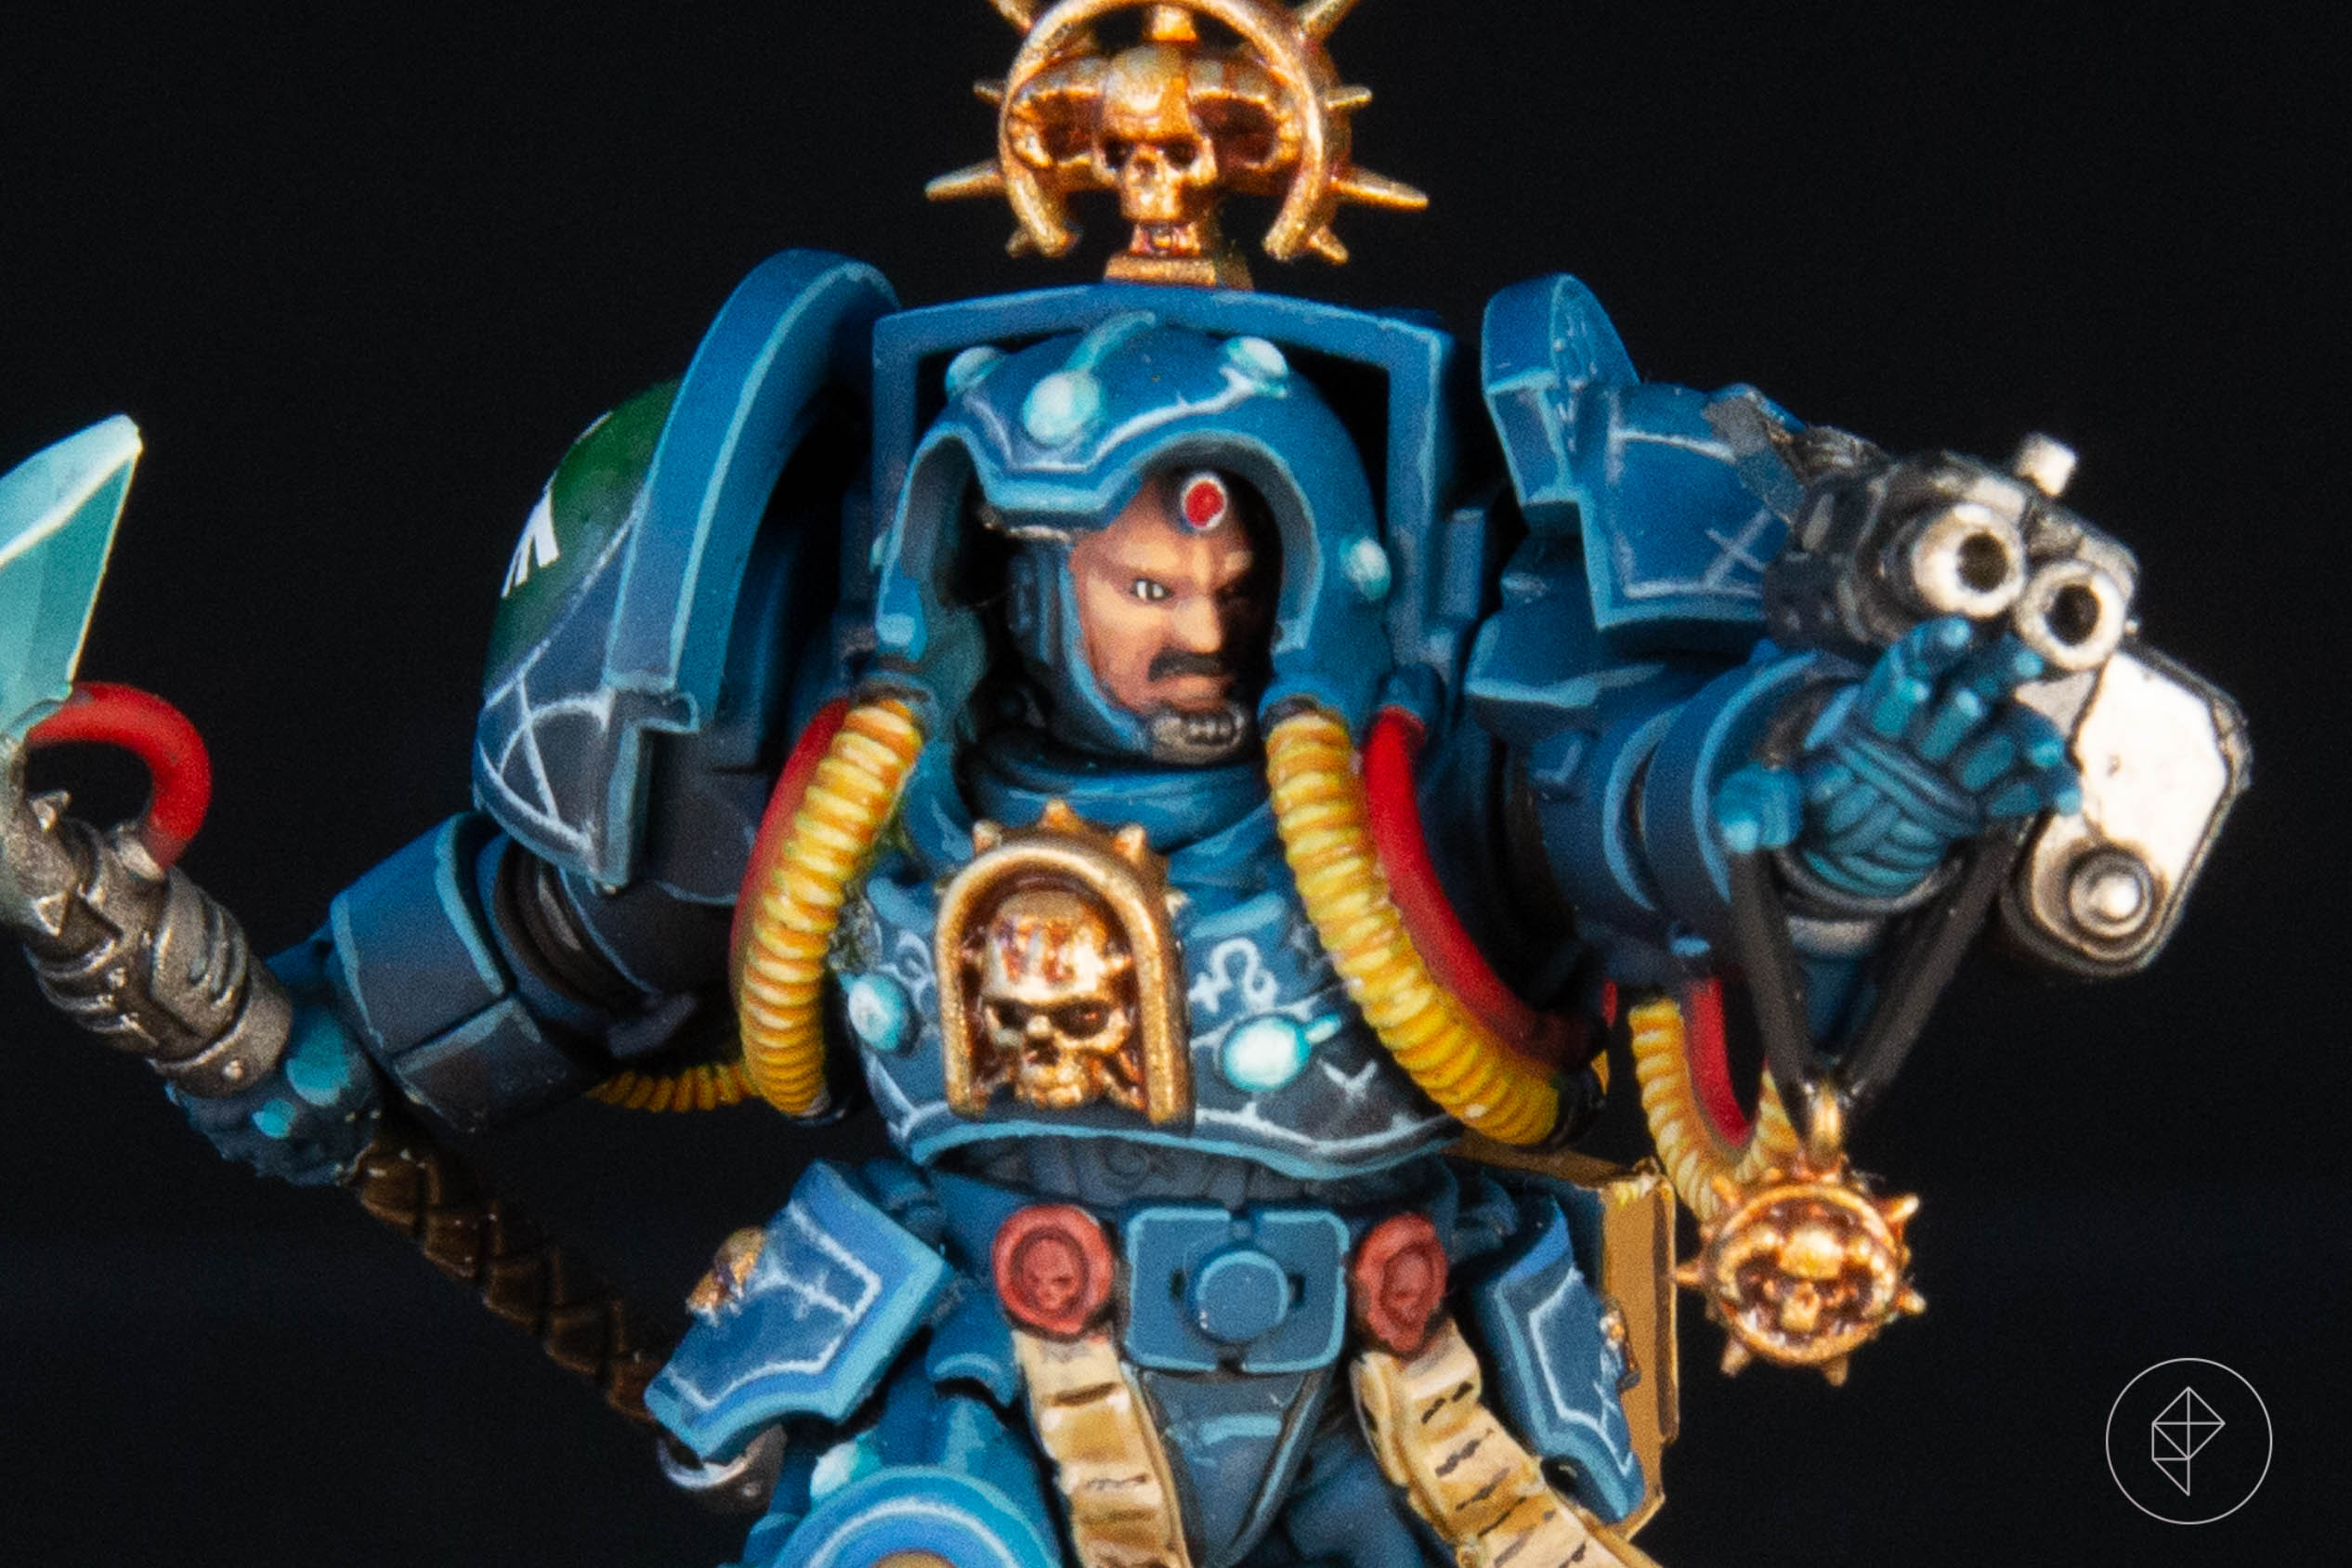 A Space Marine Terminator librarian, painted to a high level, stands ready to face a Tyranid. His armor is blue, and his hand is raised as if casting a spell.